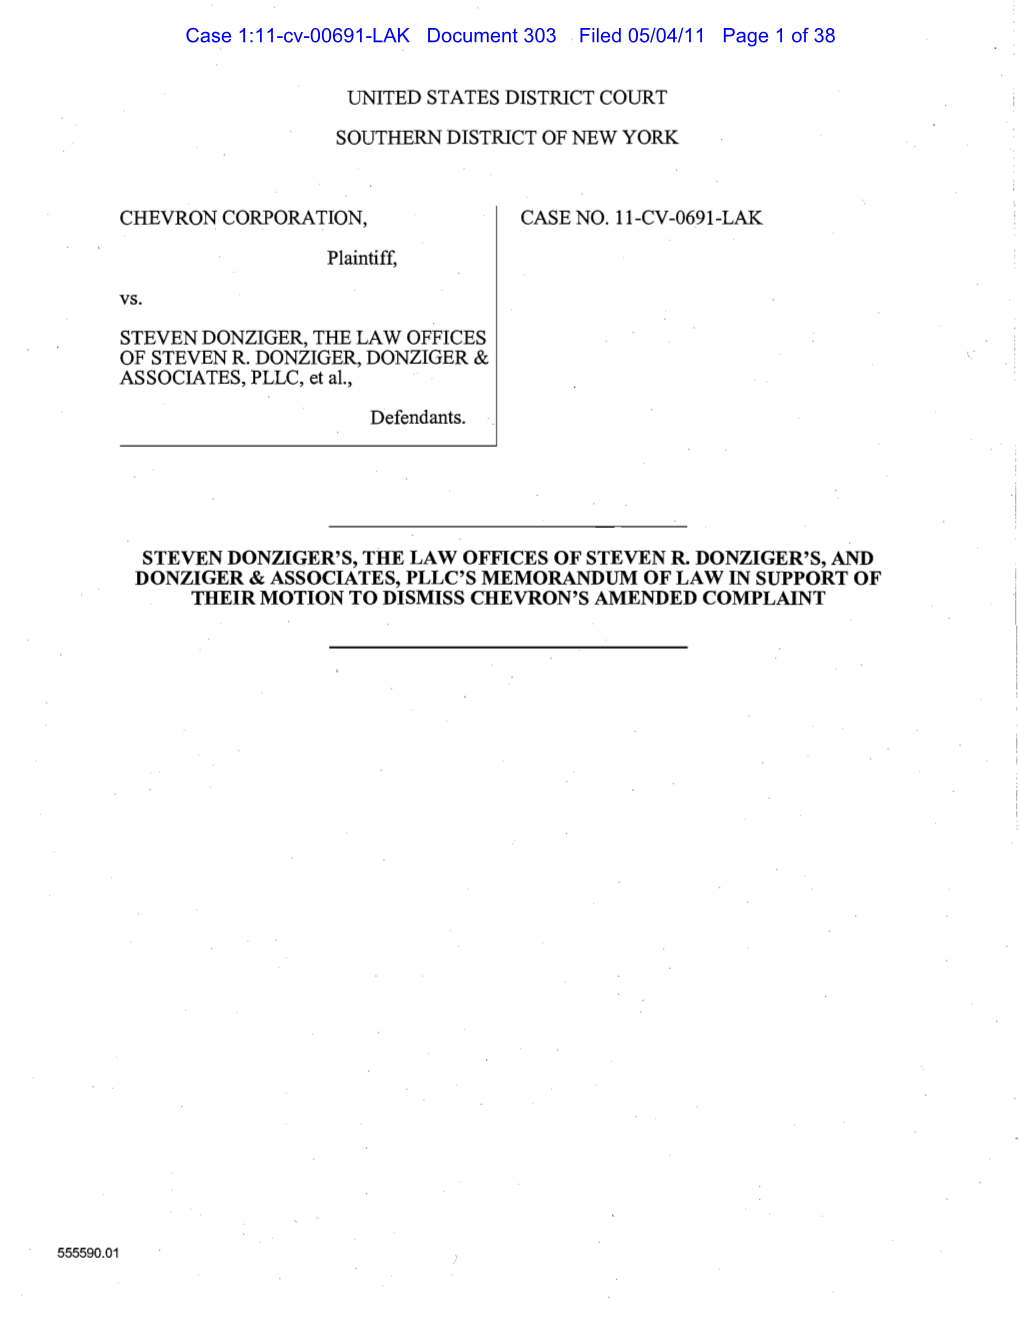 Donziger MTD Amended Complaint